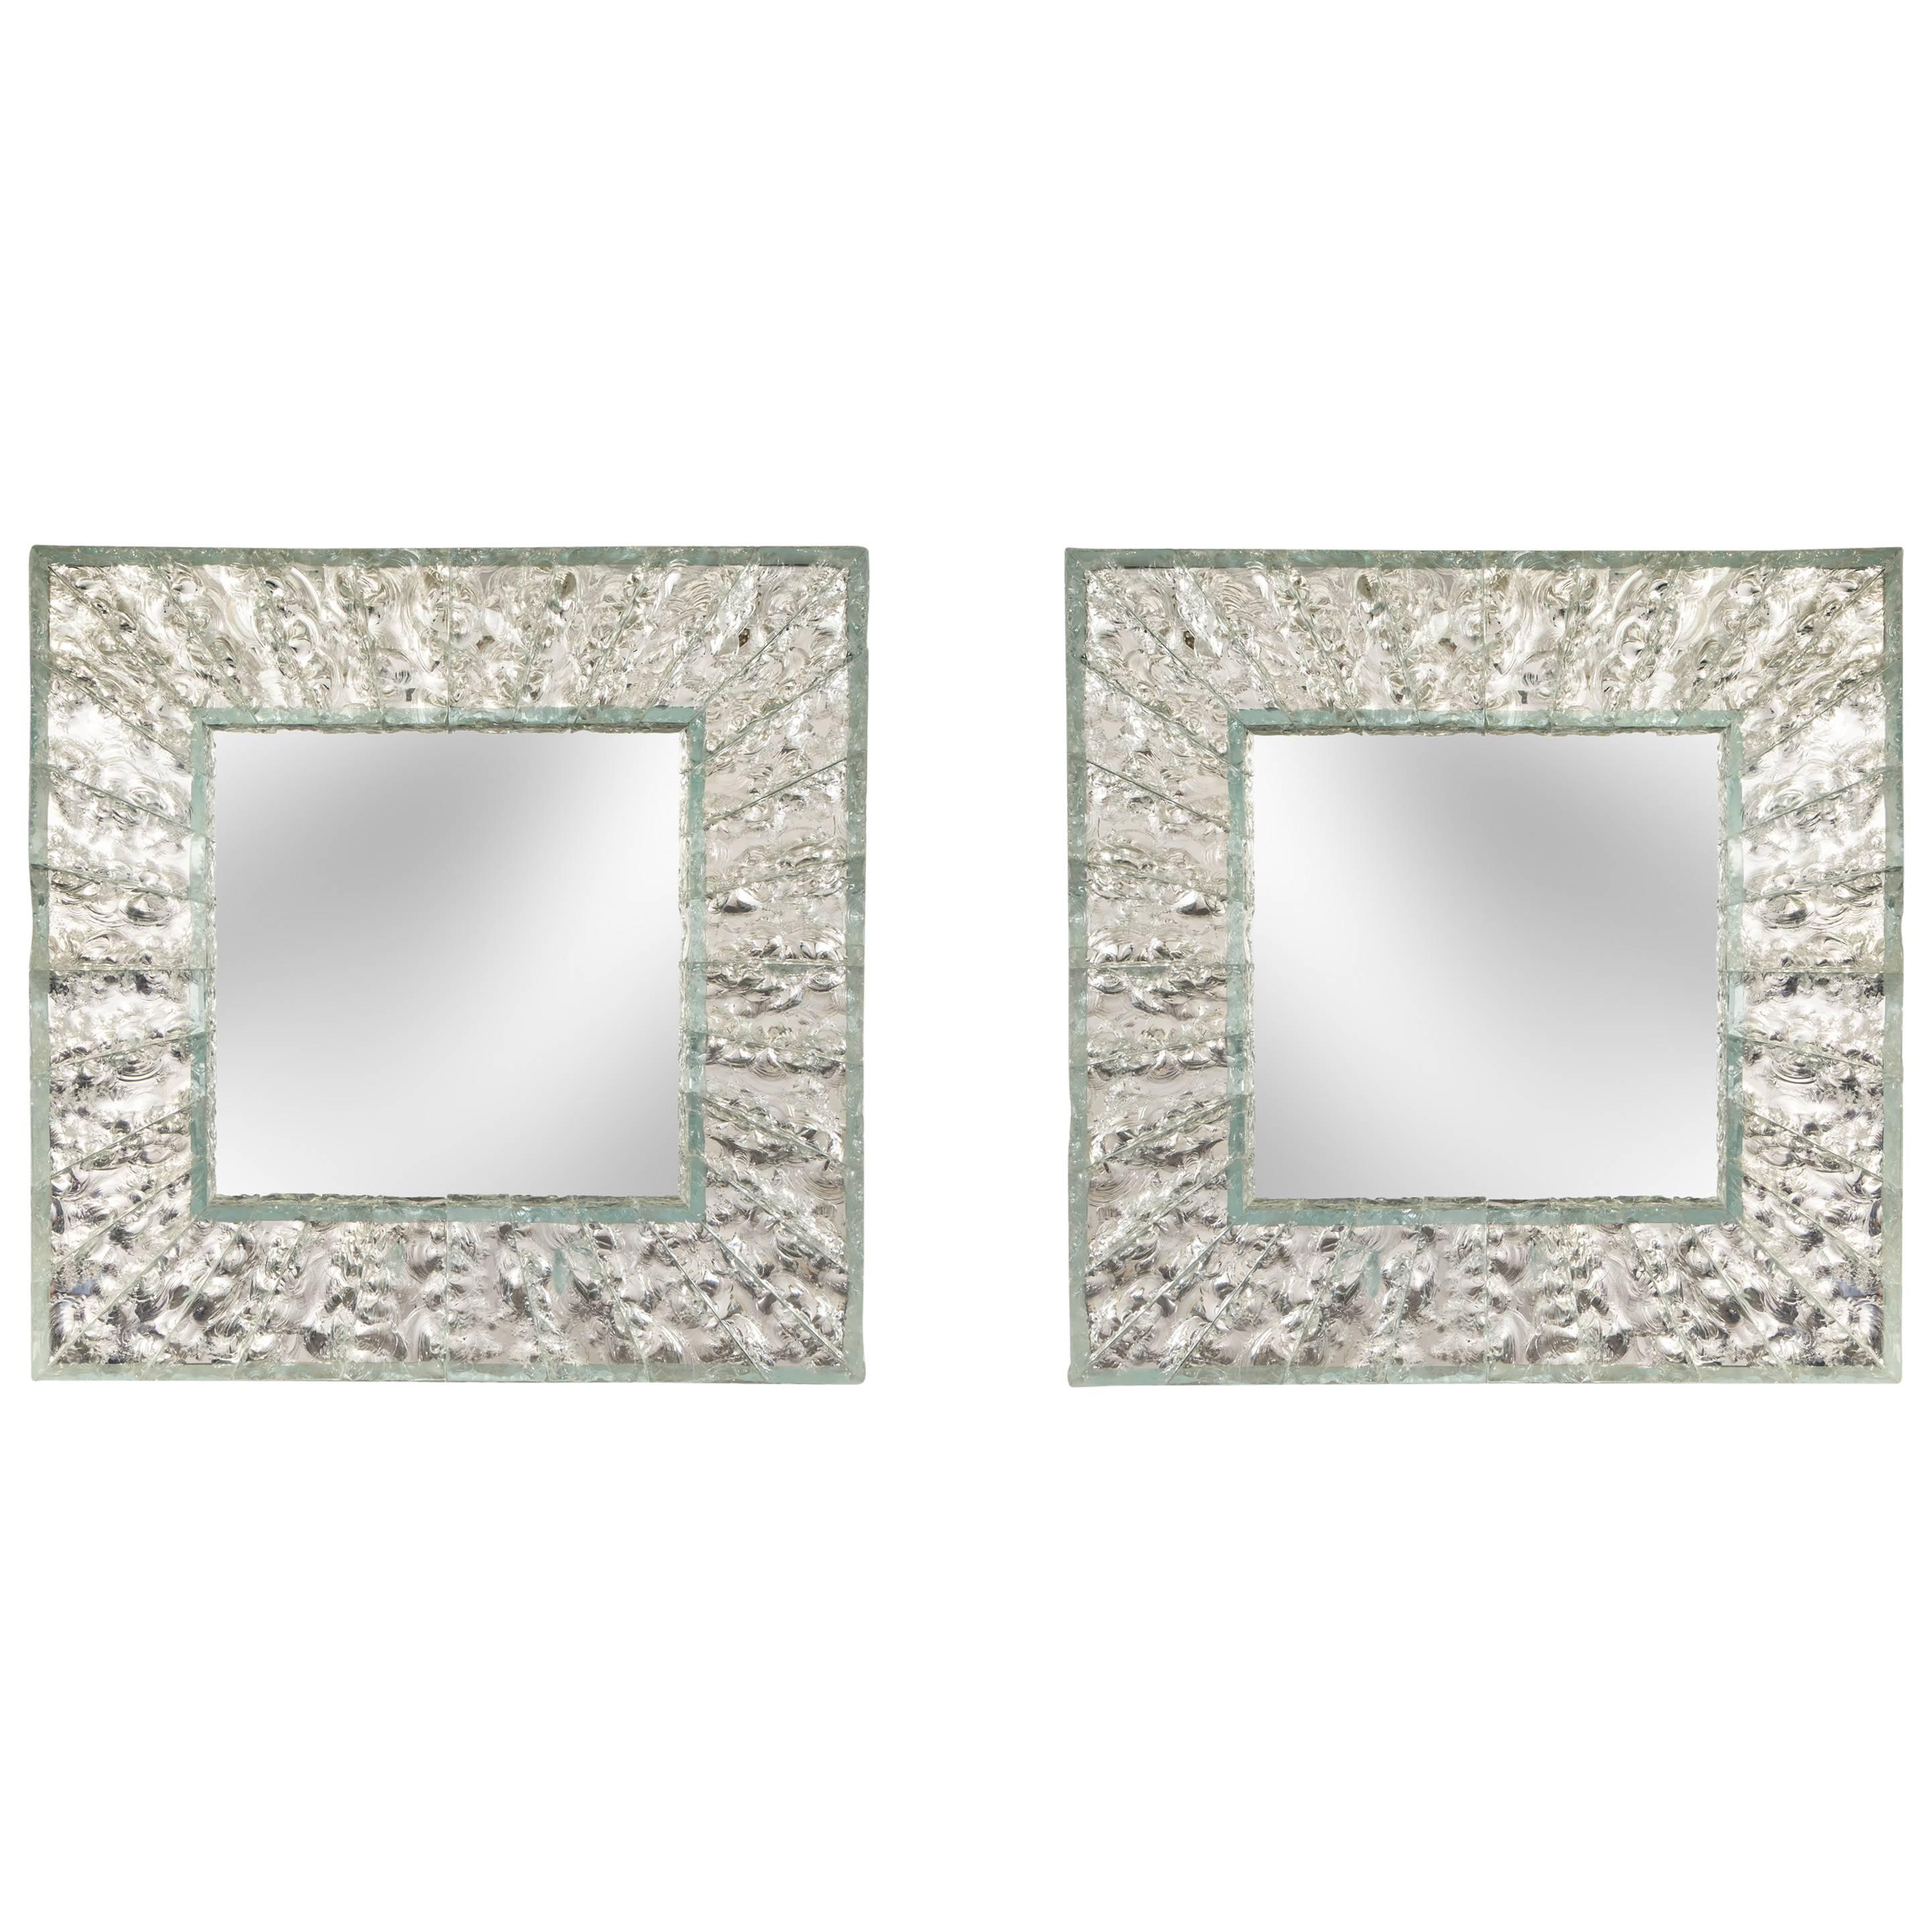 Roberto Rida, Pair of Large Martelé Colorless Glass Mirrors